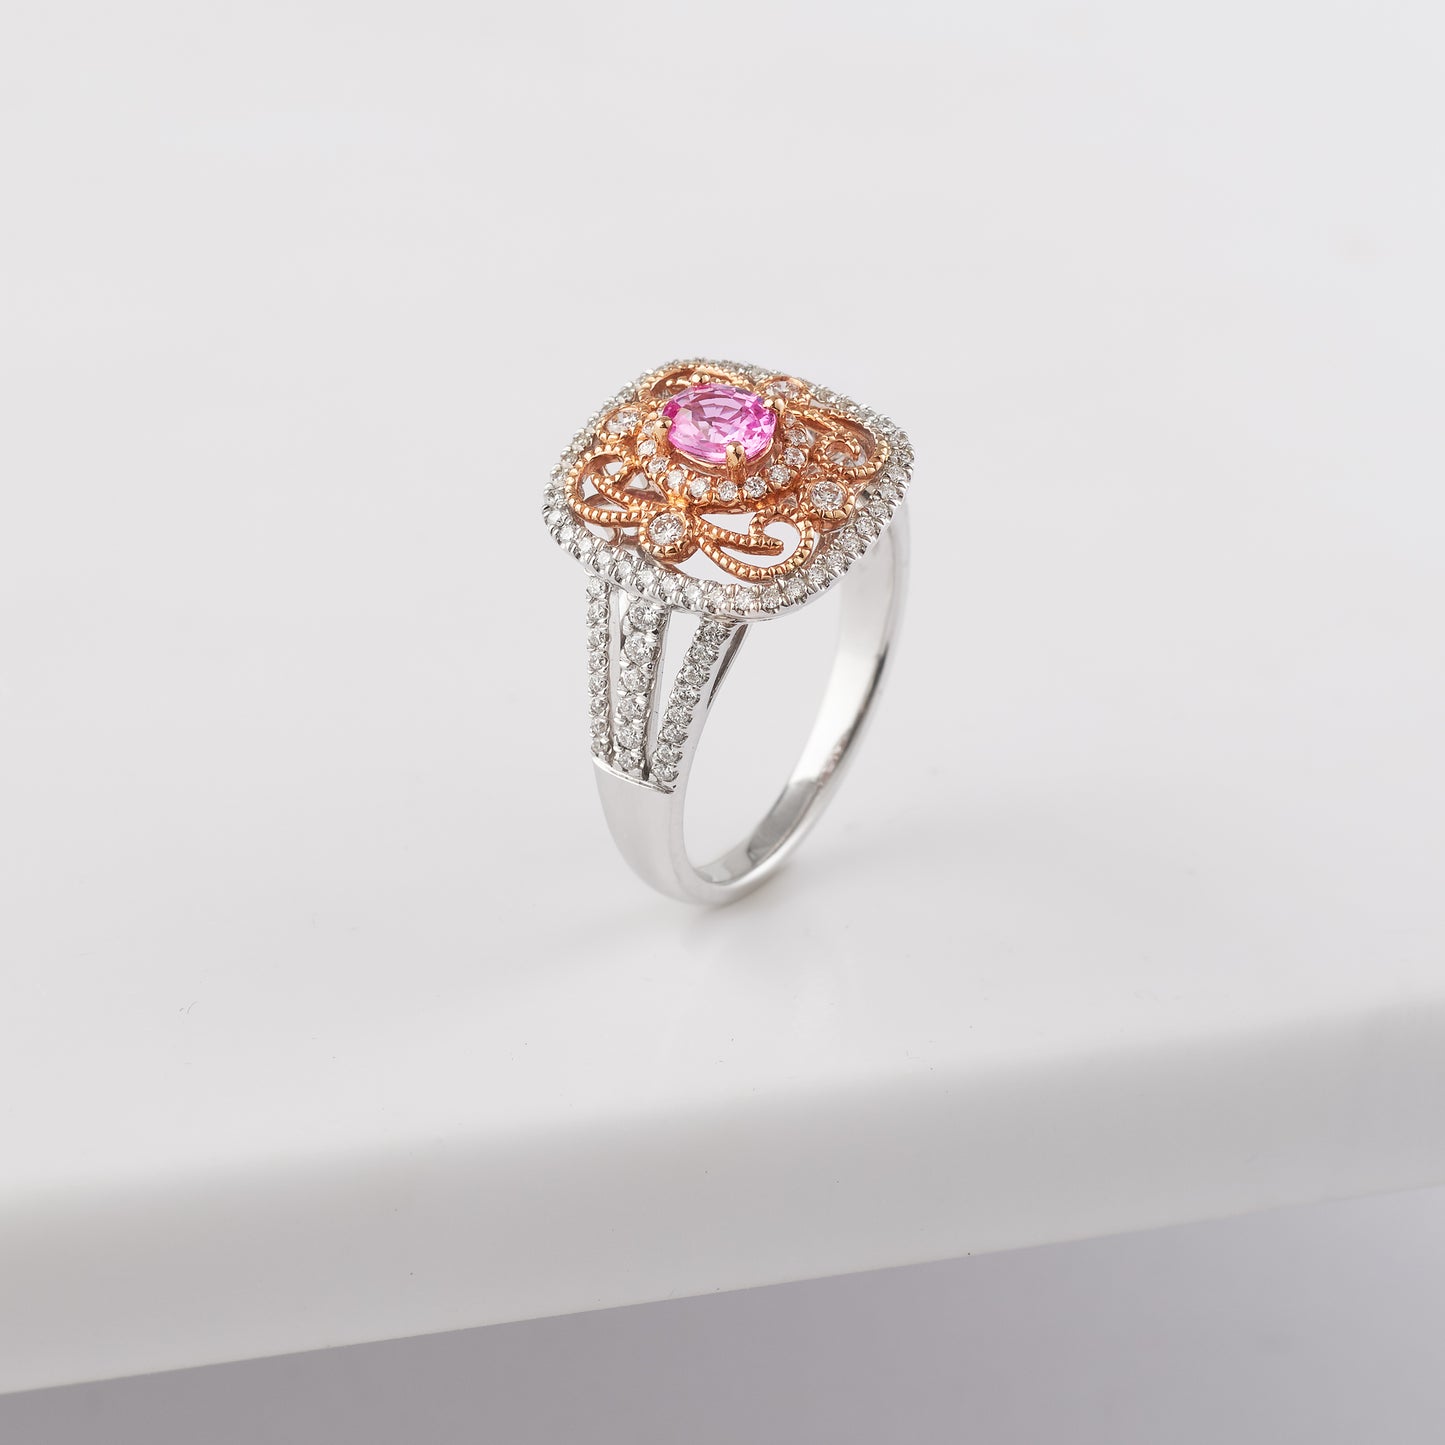 18K White and Rose Gold Oval Pink Sapphire Diamond Vintage Inspired Dress Ring 0.5tdw